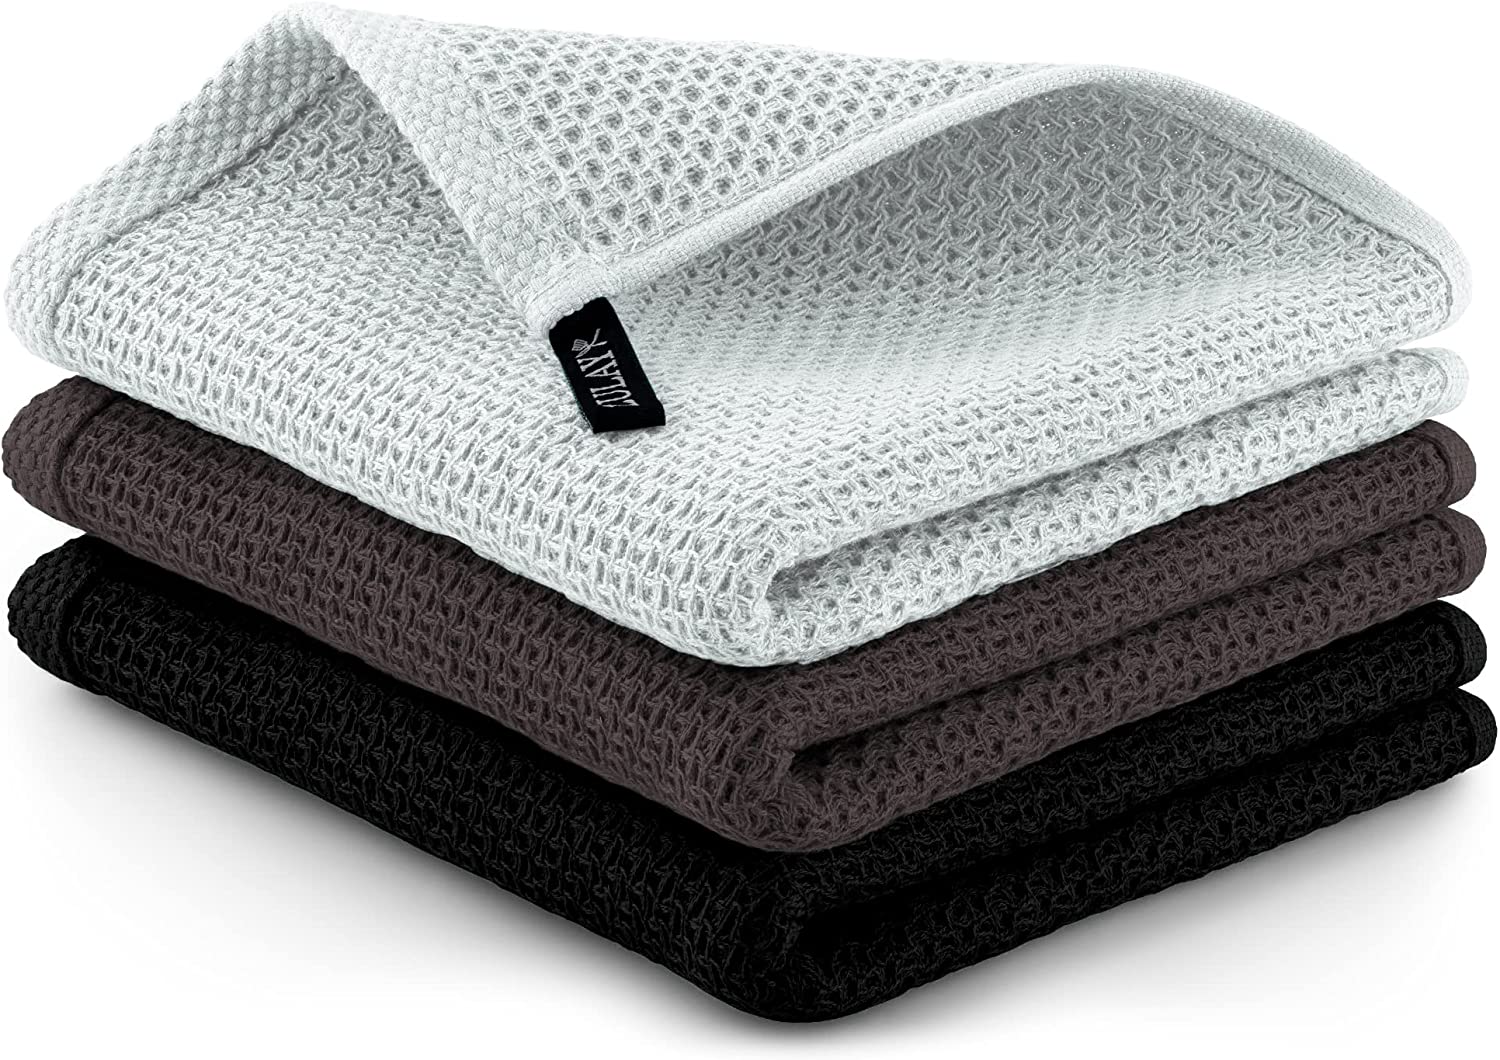 Bloomingville Cotton Waffle Weave Kitchen Towels